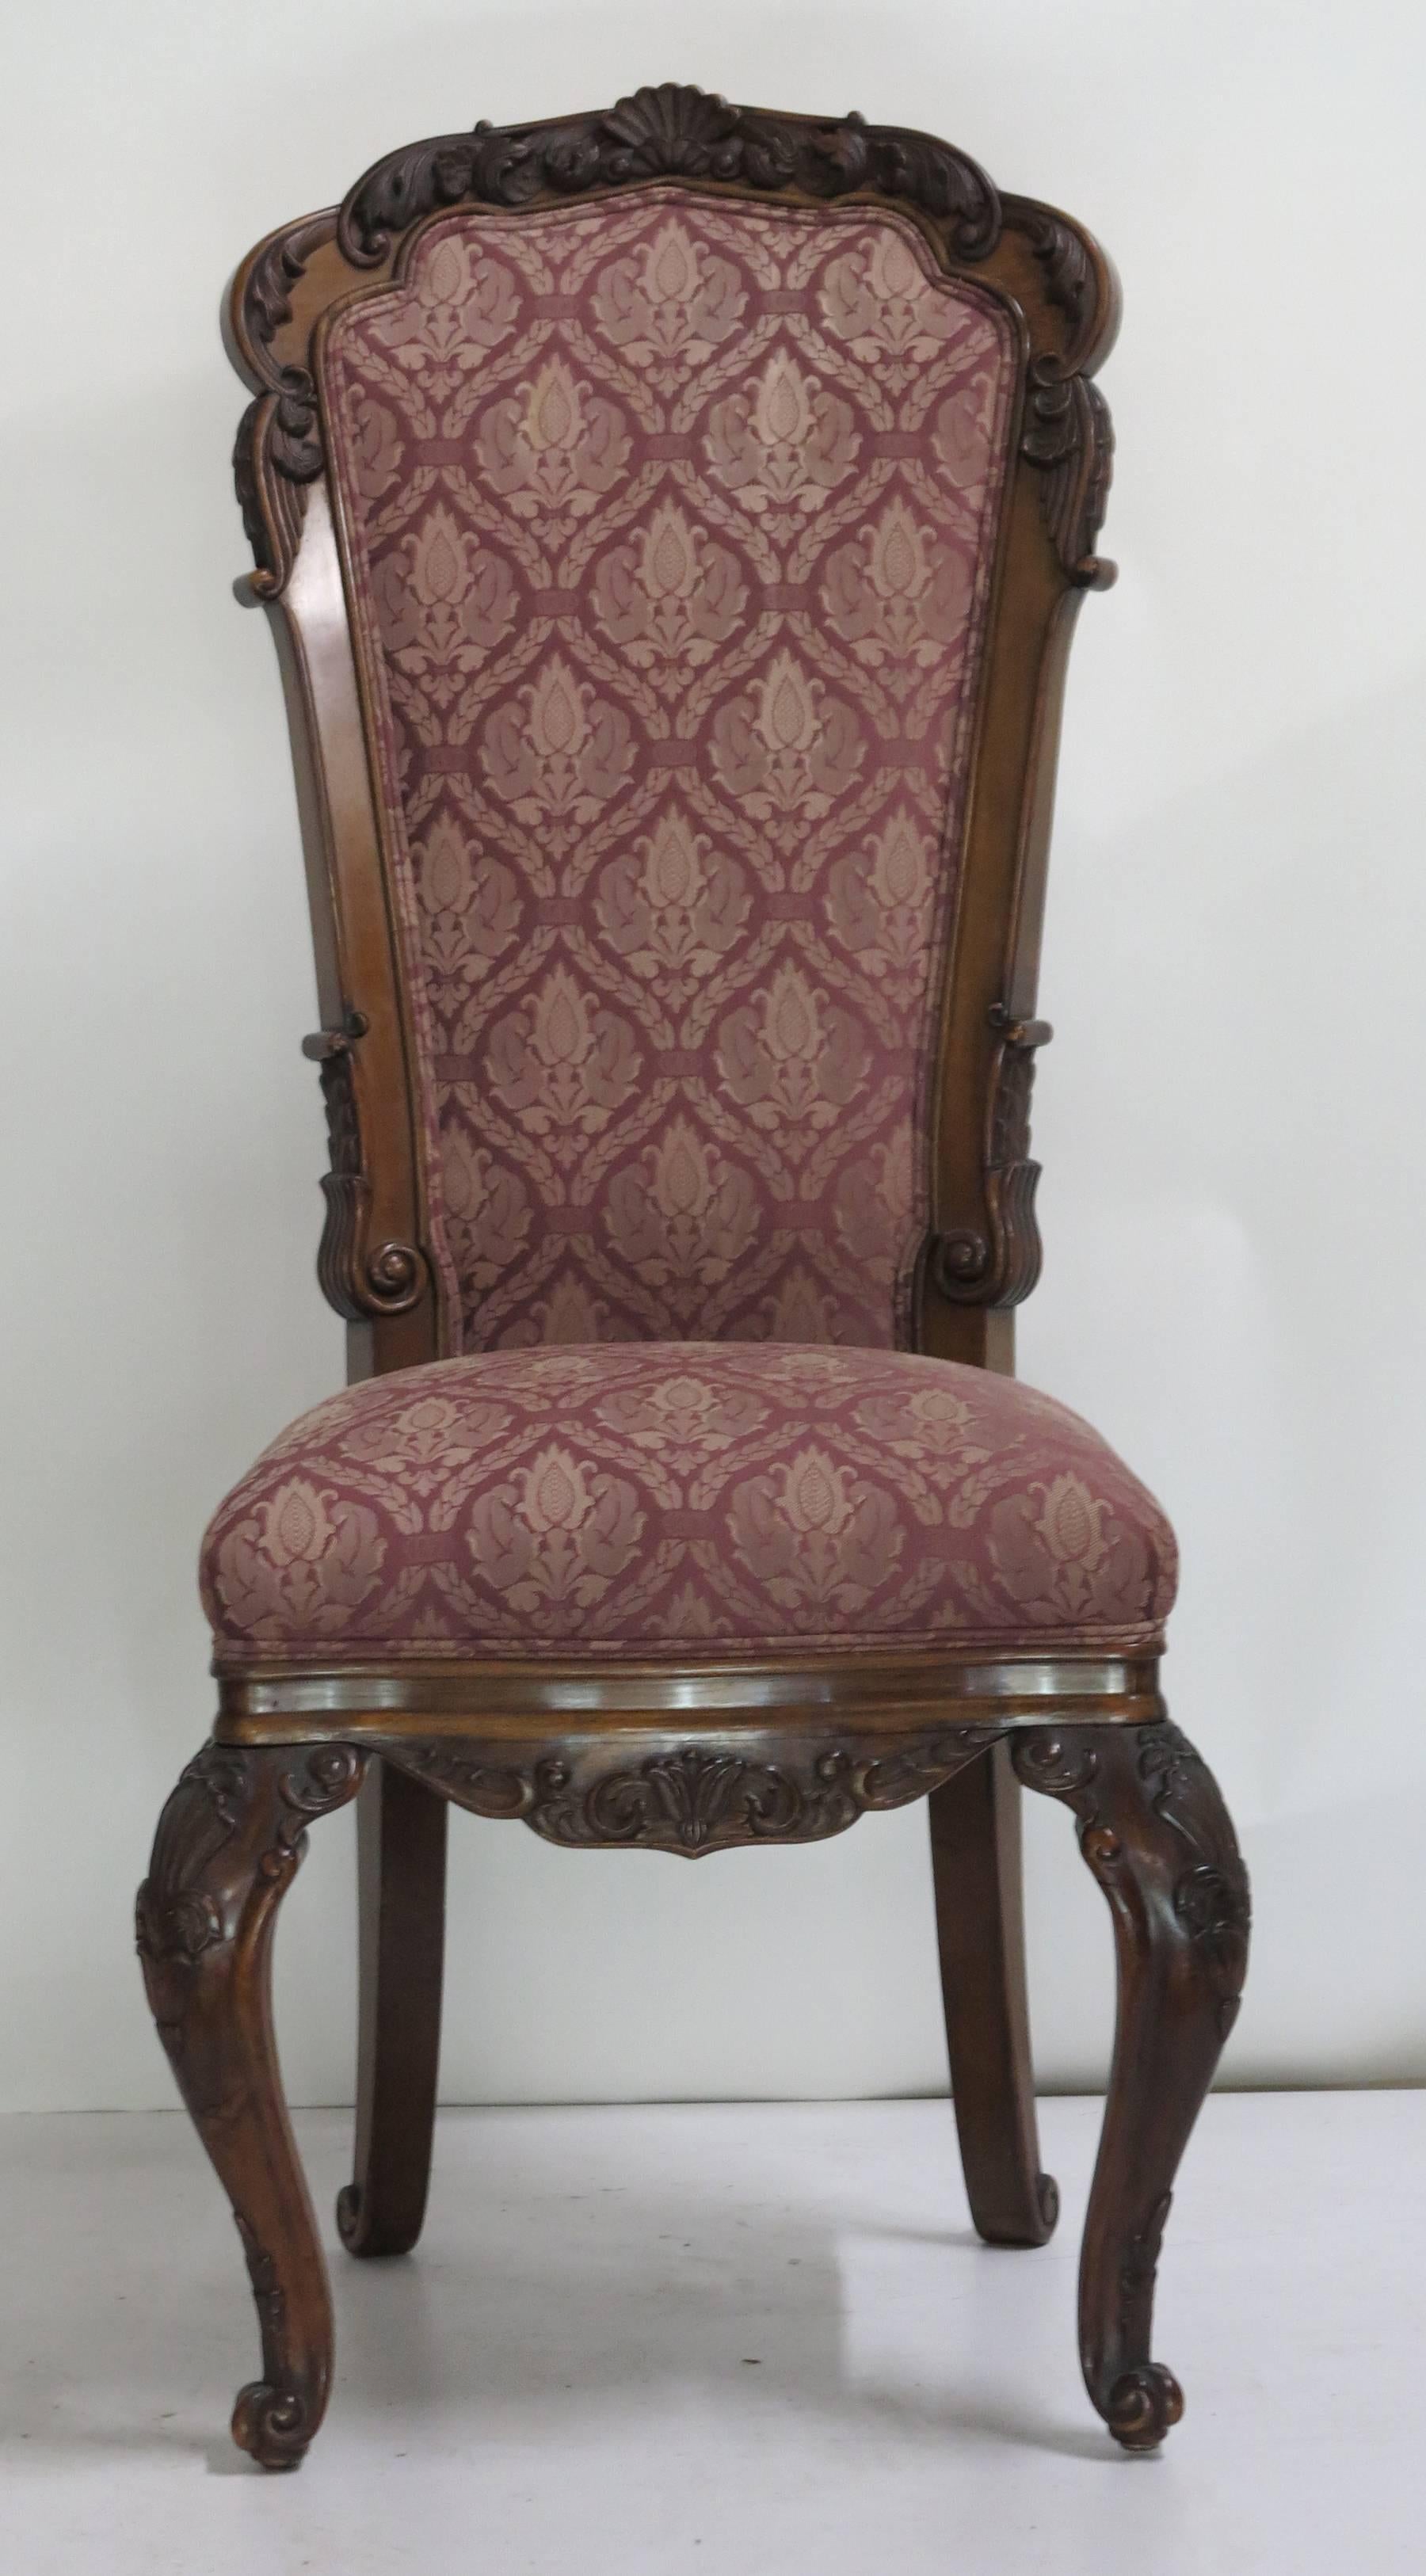 19th century Louis XV style six dining chairs. Heavy chairs with finely detailed craving. Exceptional set of dining chairs.